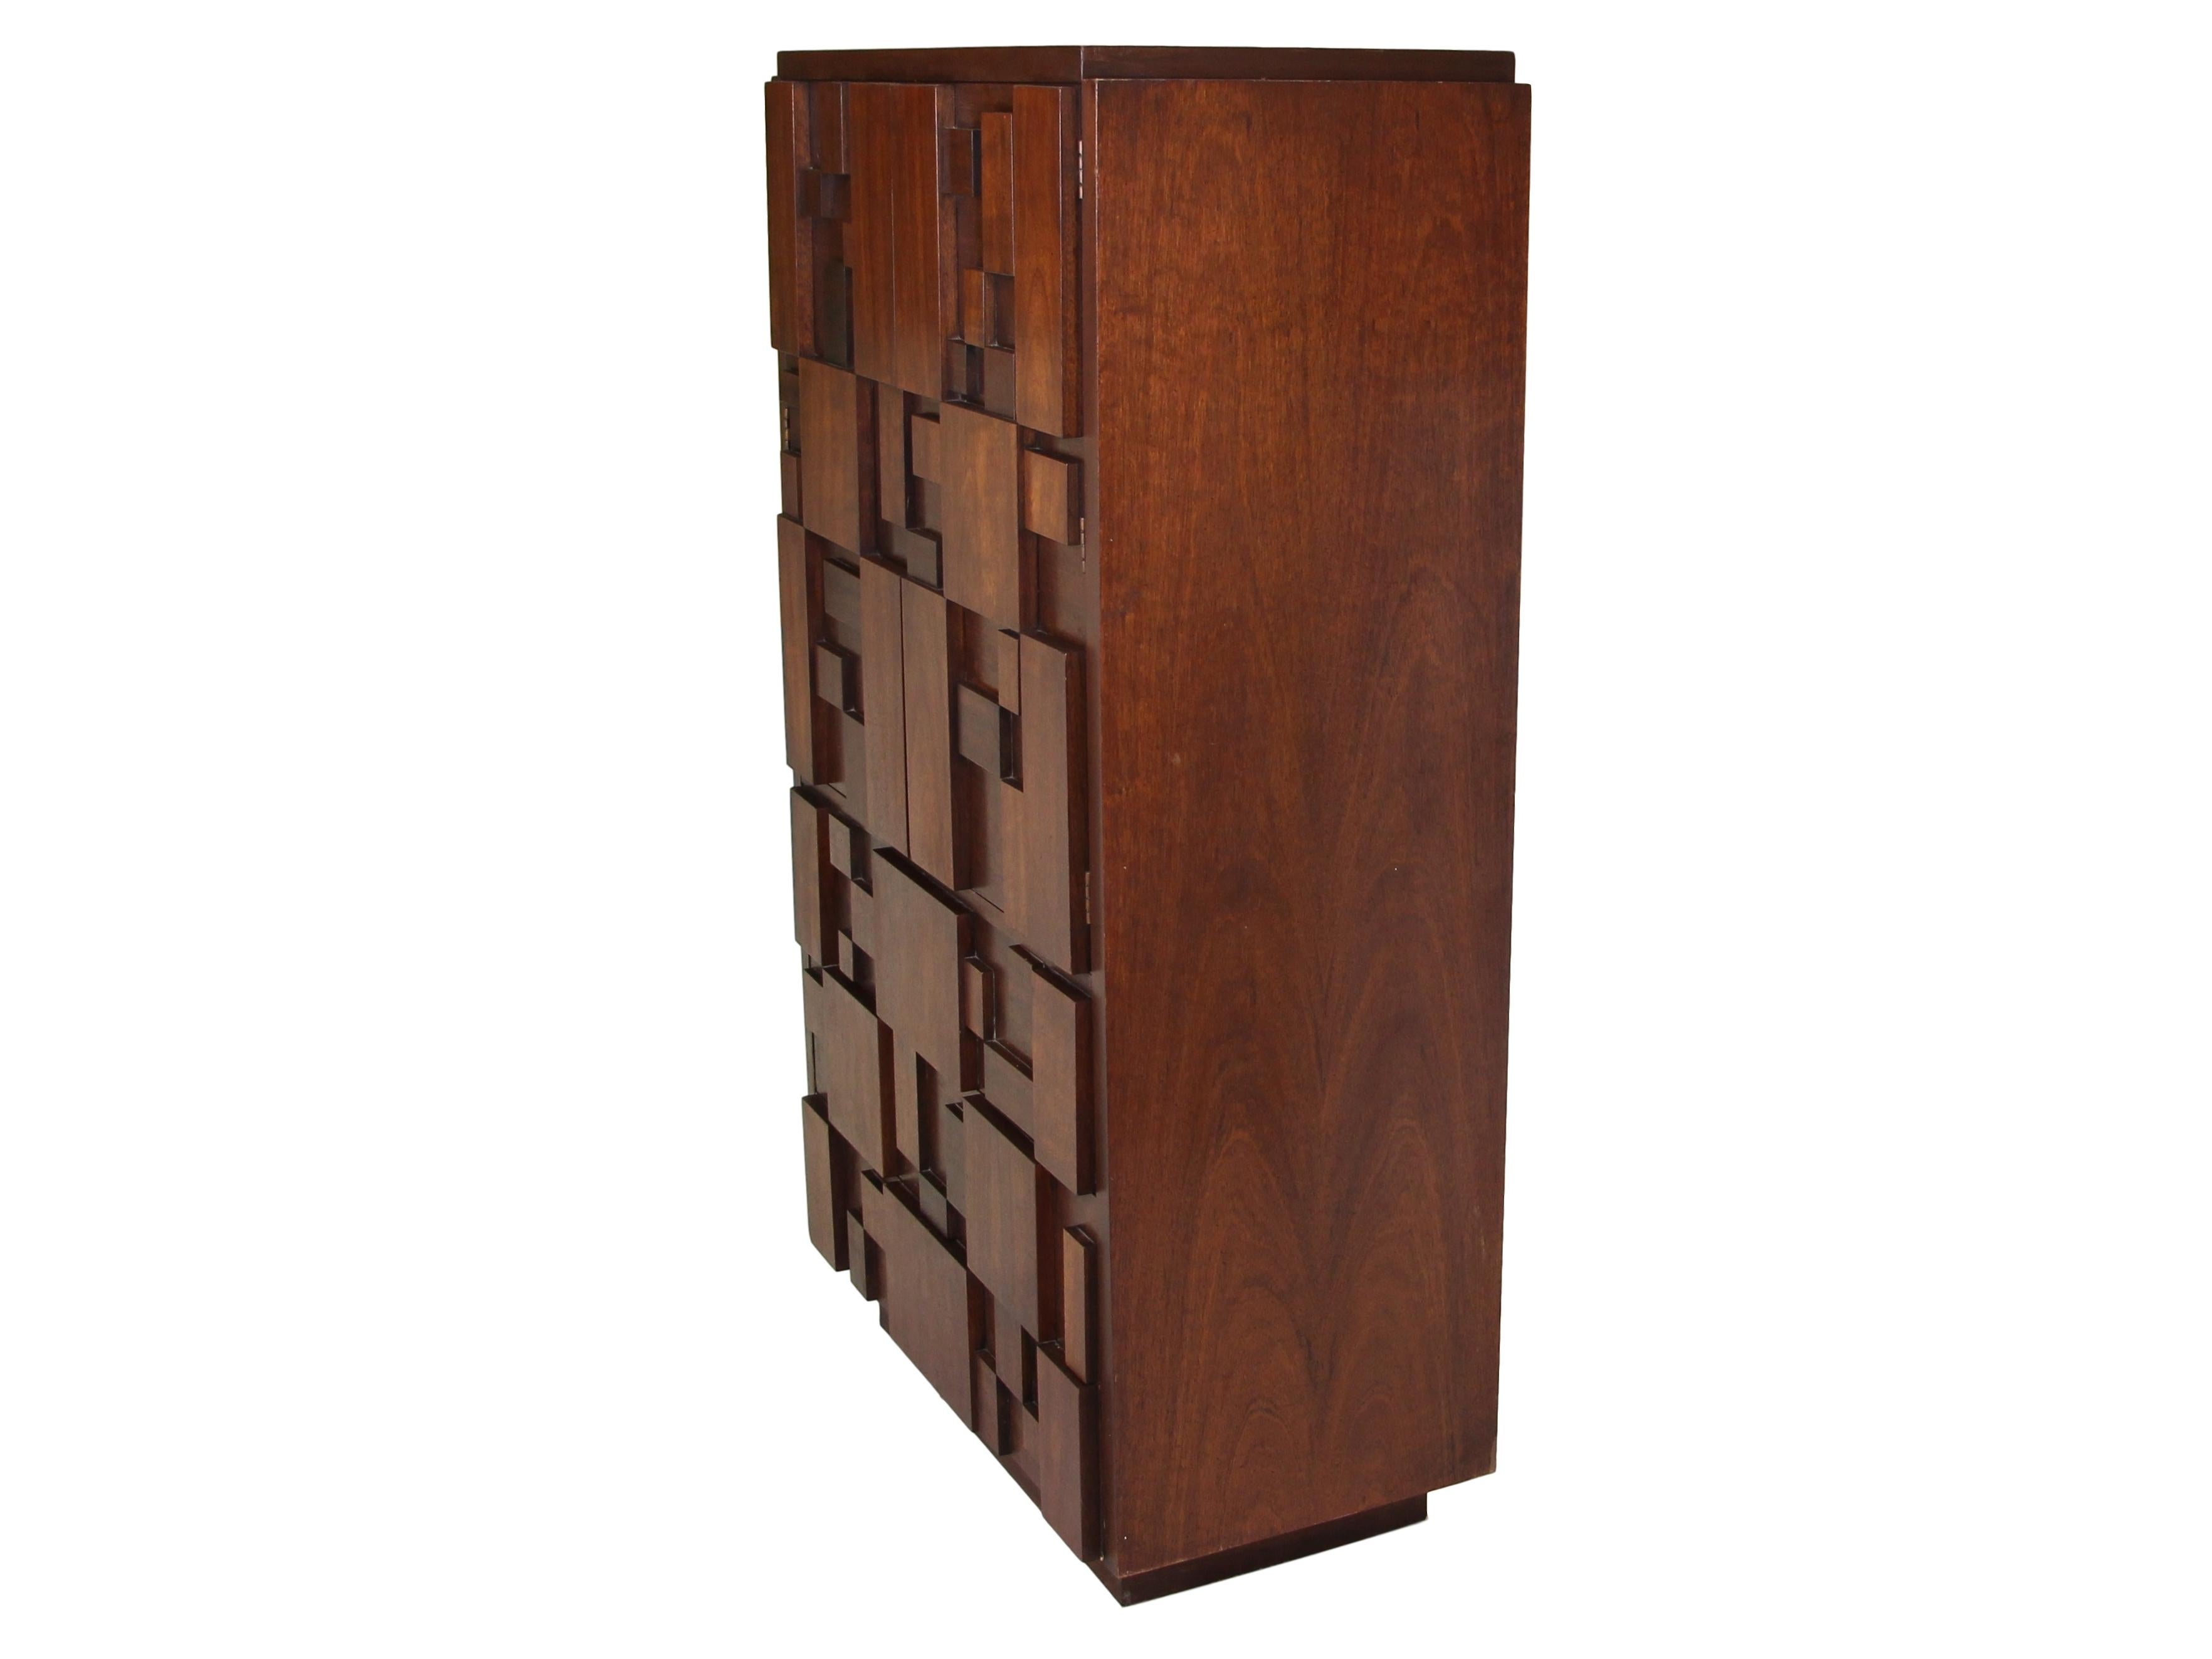 American Midcentury Brutalist Armoire by Lane For Sale